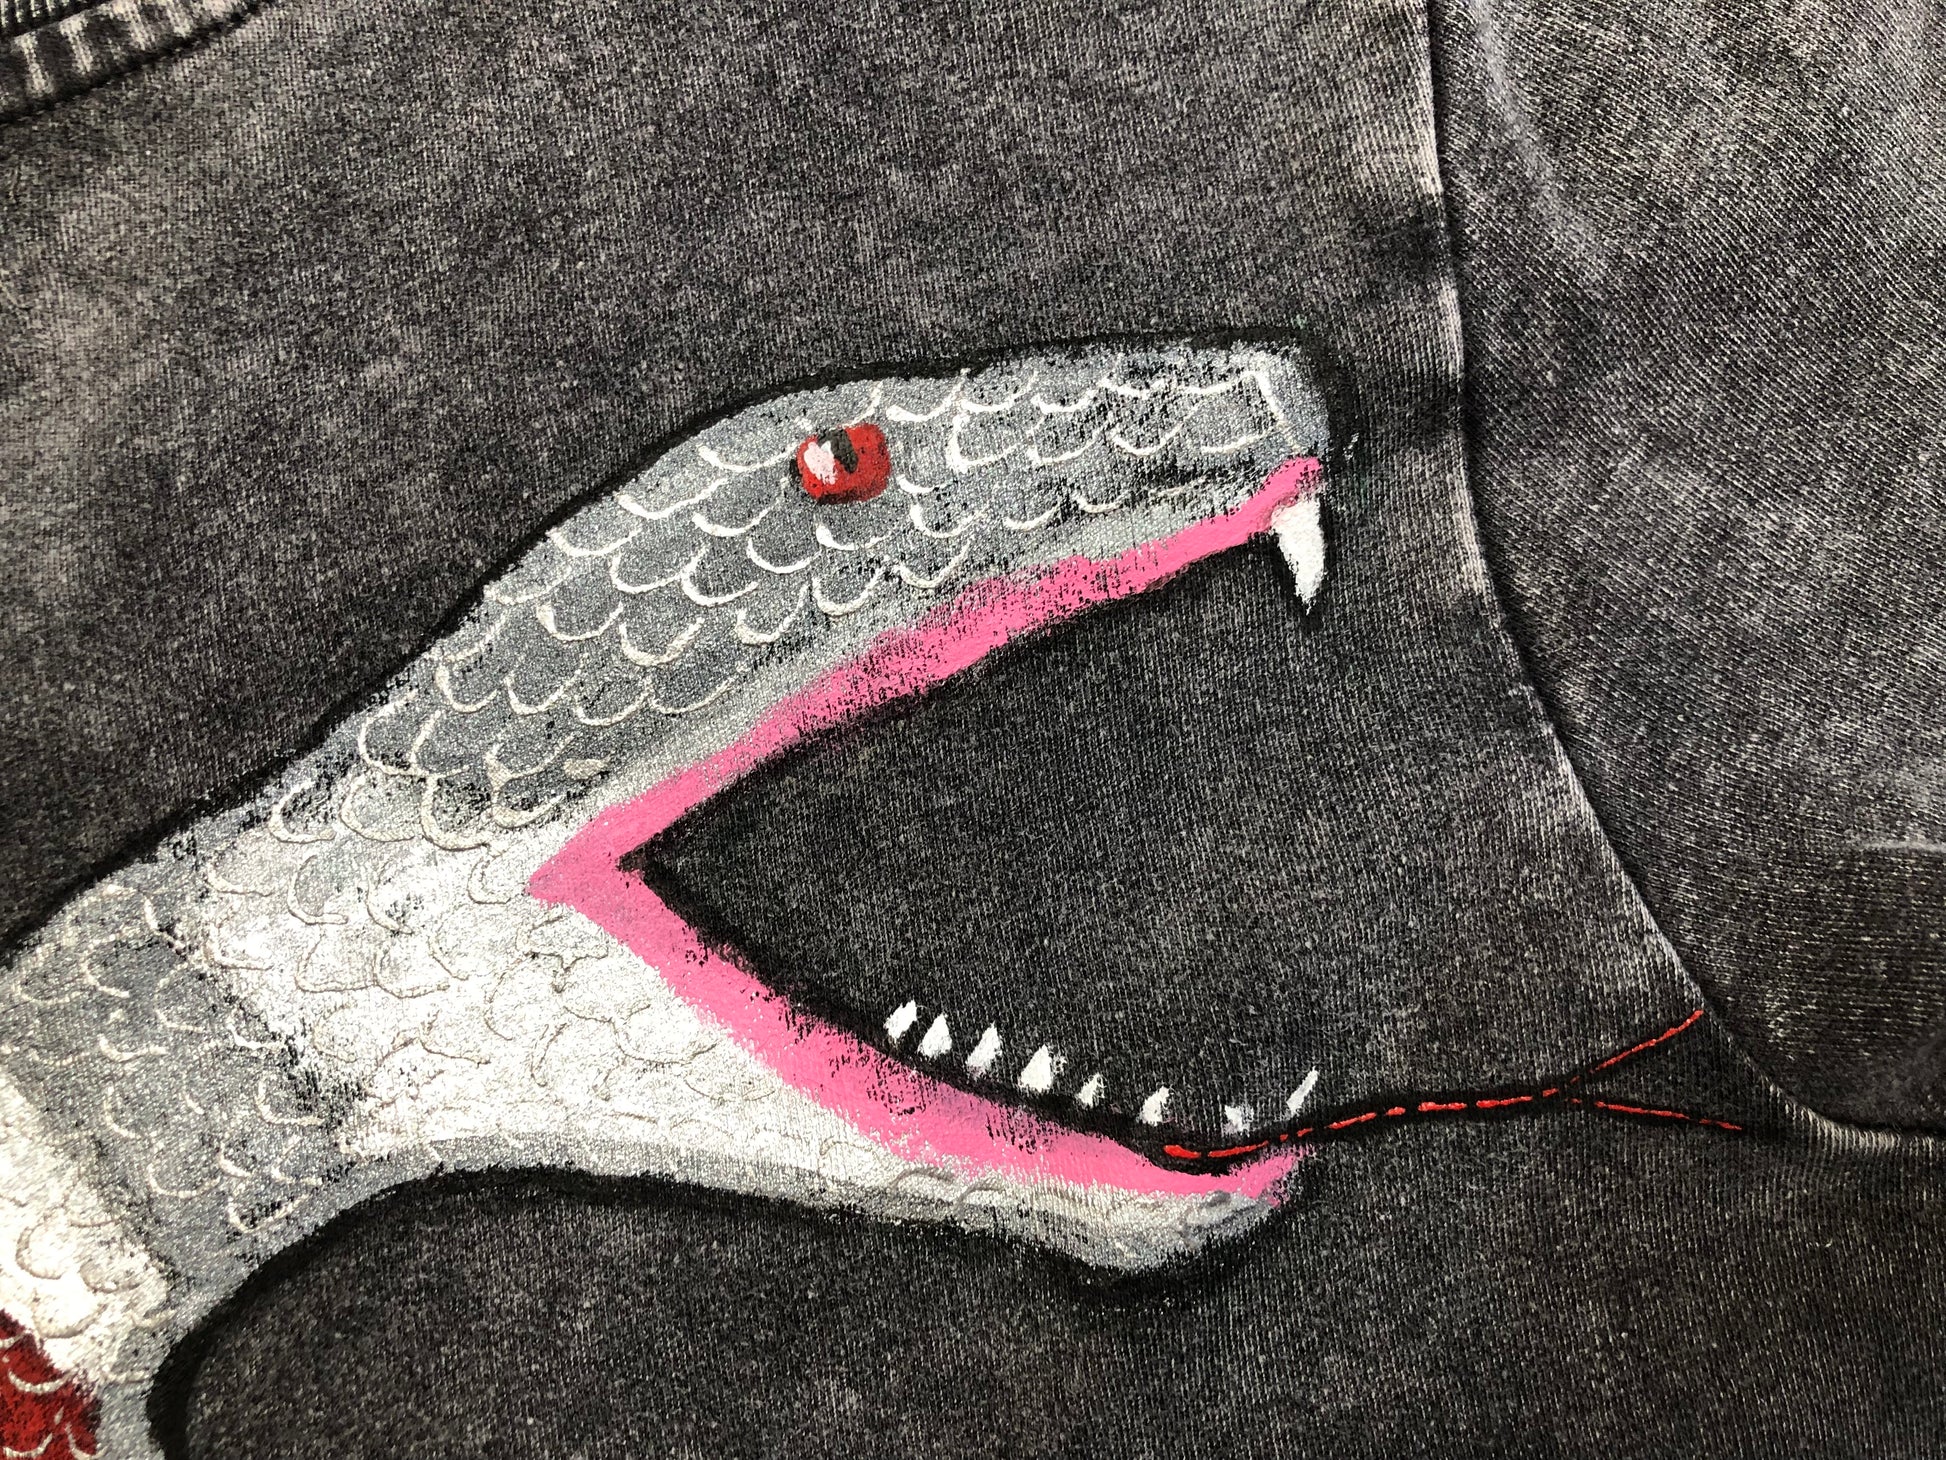 The mouth of a snake with a tongue on women's clothing in detail